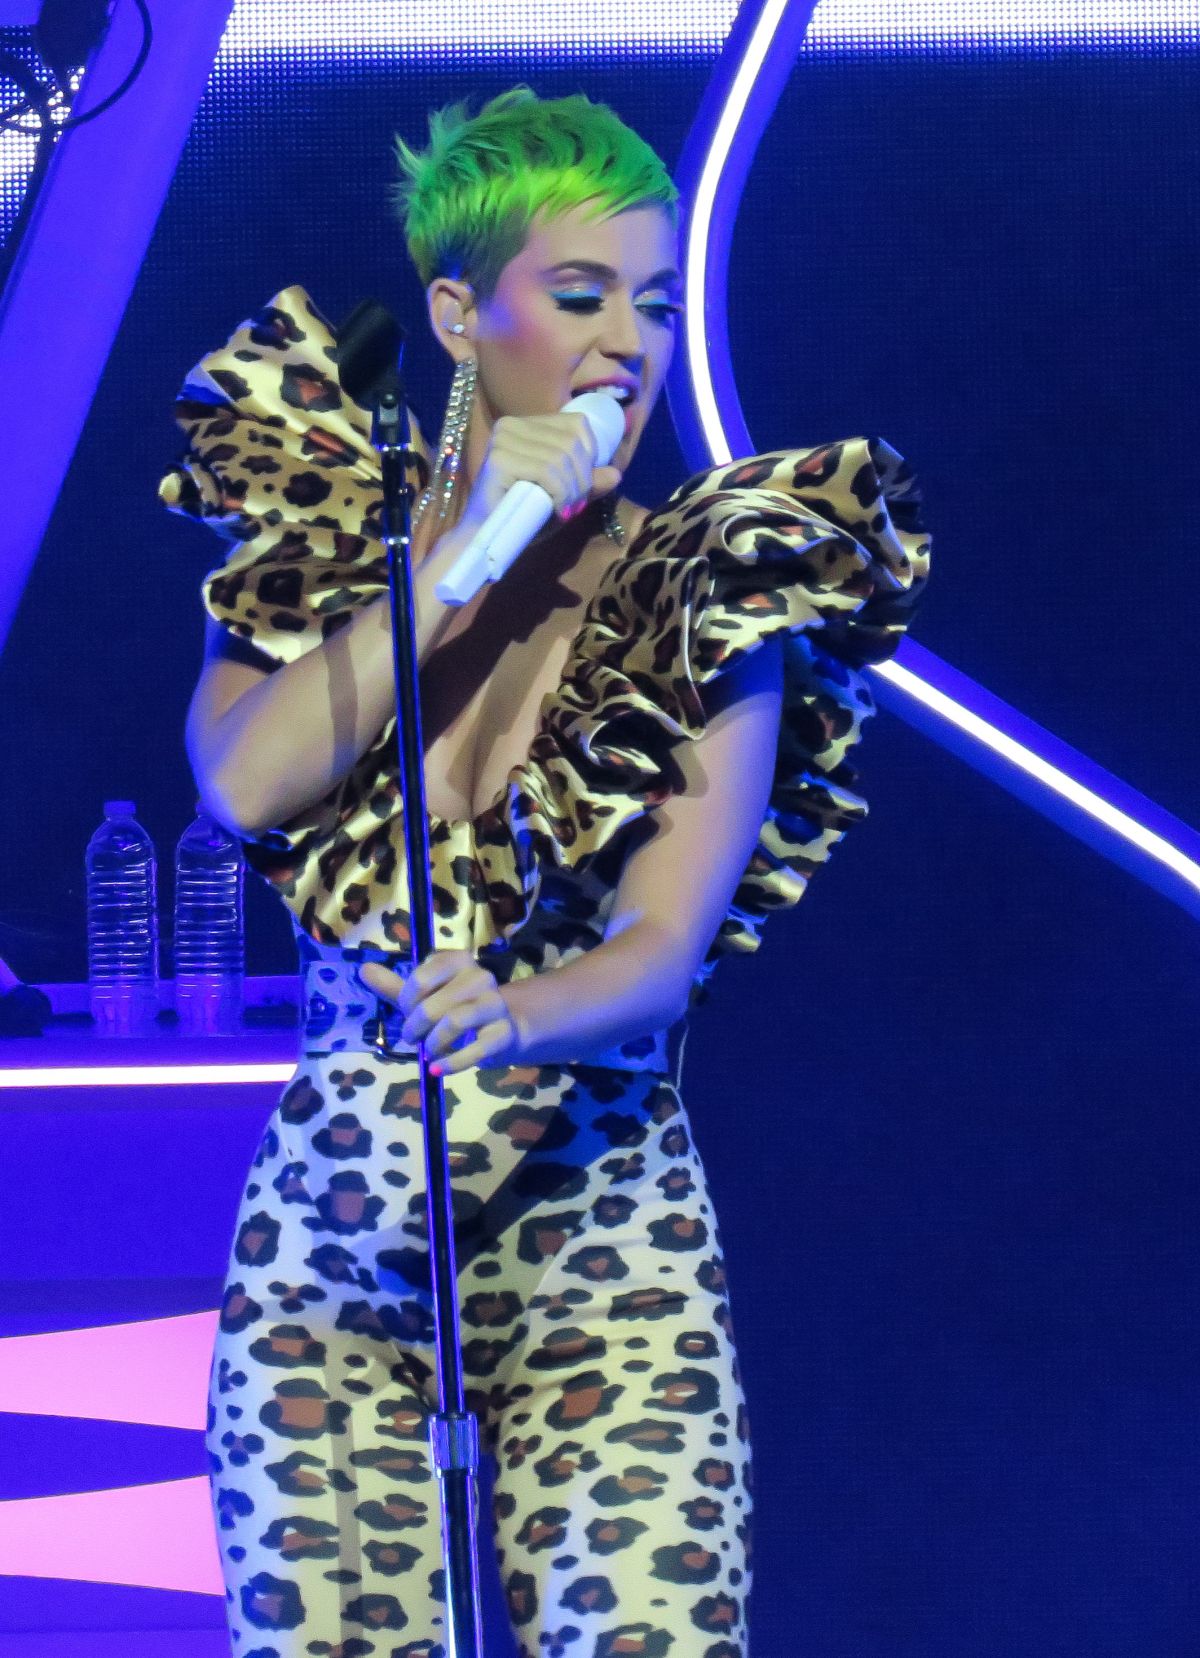 katy-perry-performs-for-citibank-cardholders-in-los-angeles-09-10-2018-2.jpg